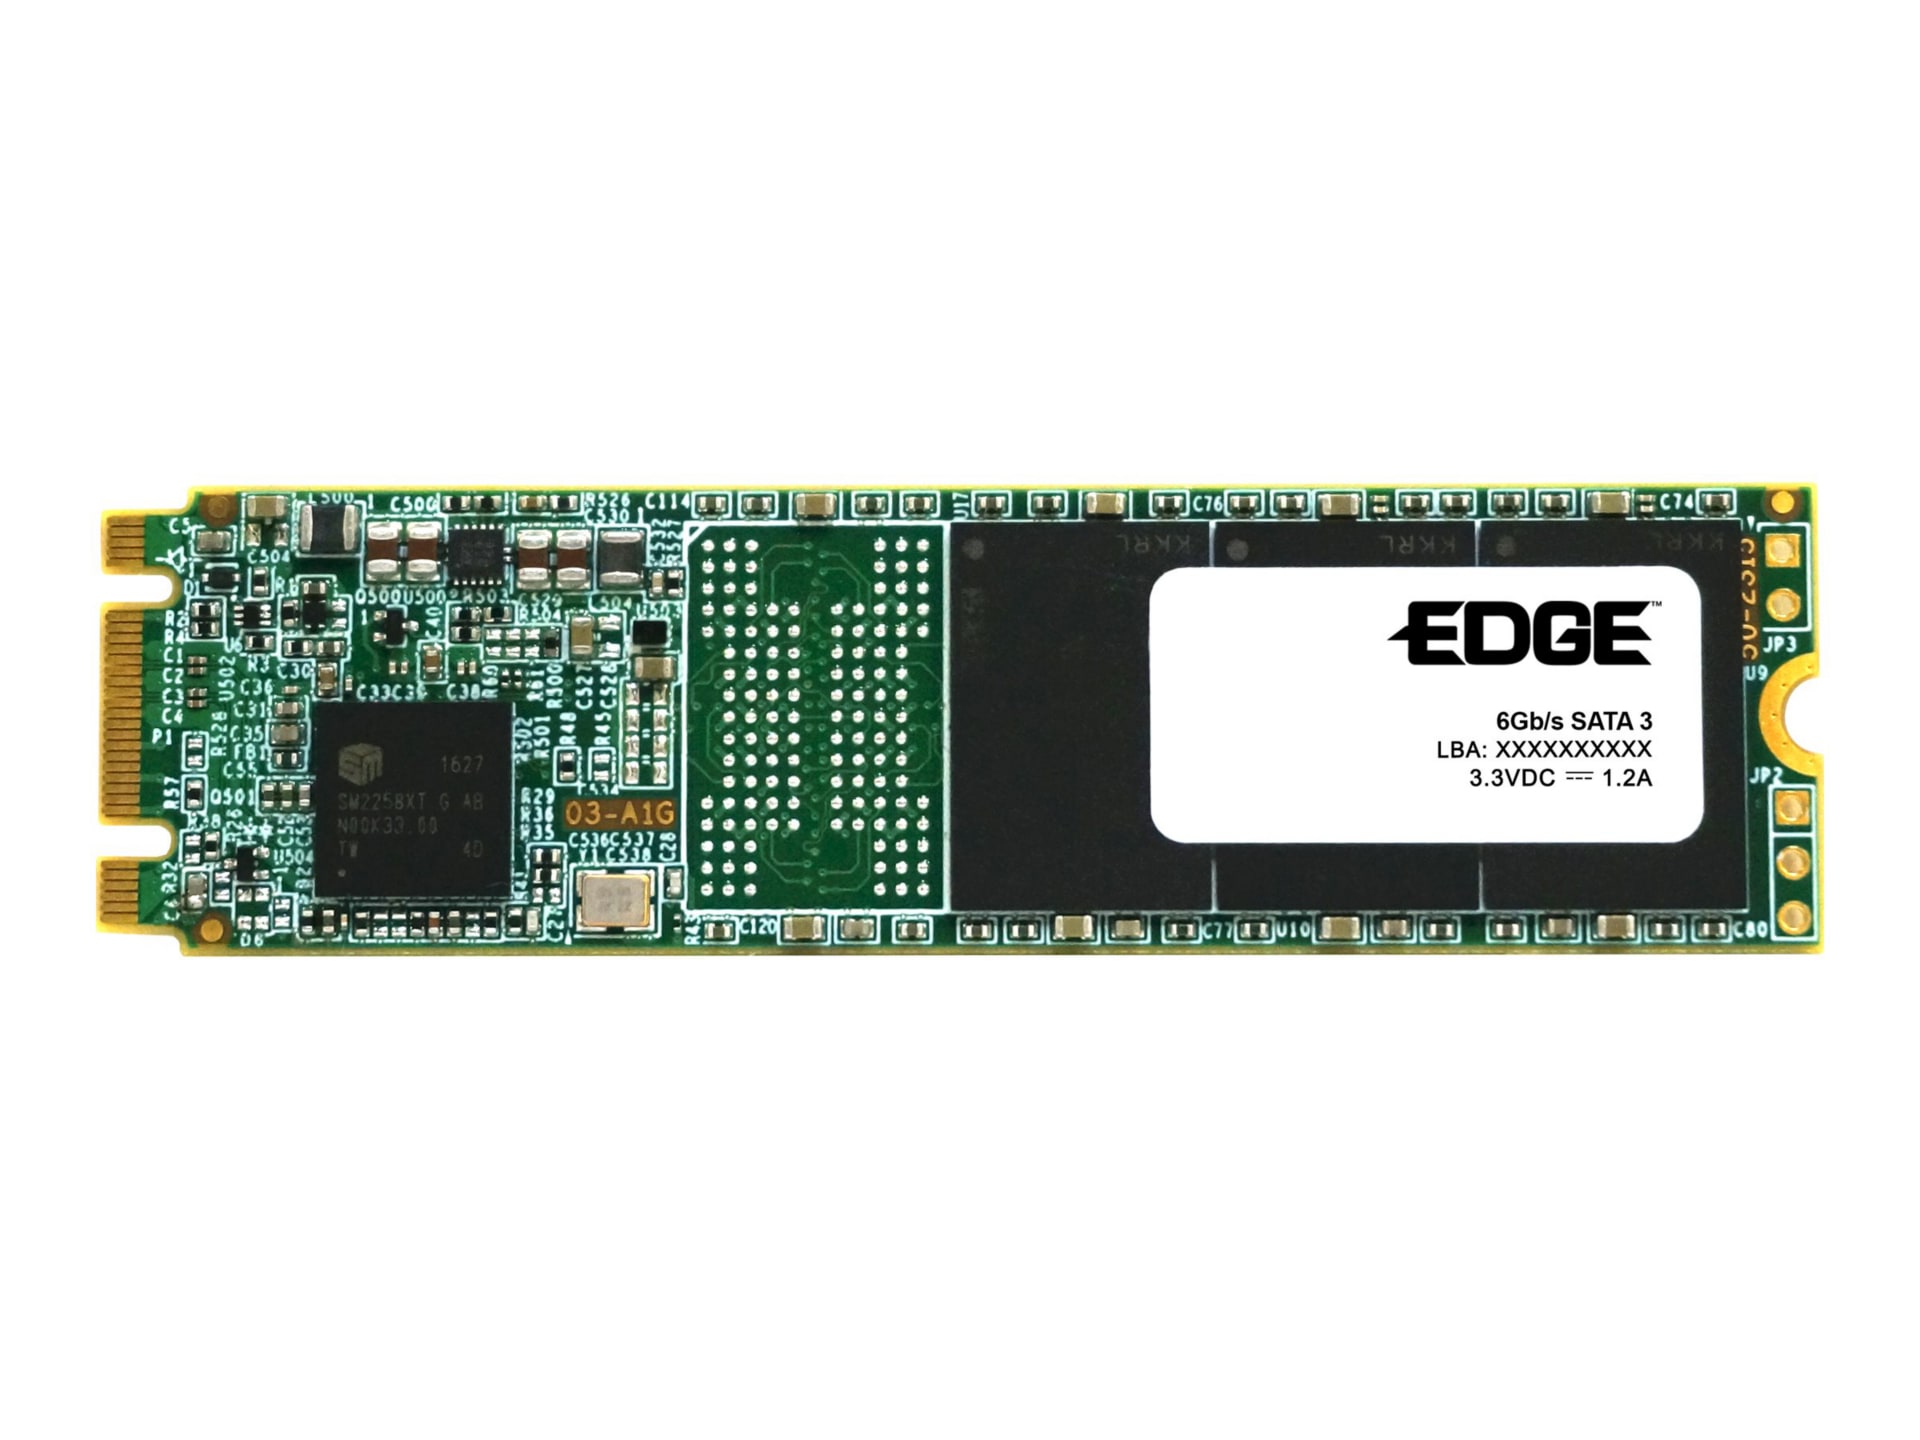 Edge Memory CLX600 500GB SATA 6Gbps M.2 80mm Solid State Drive